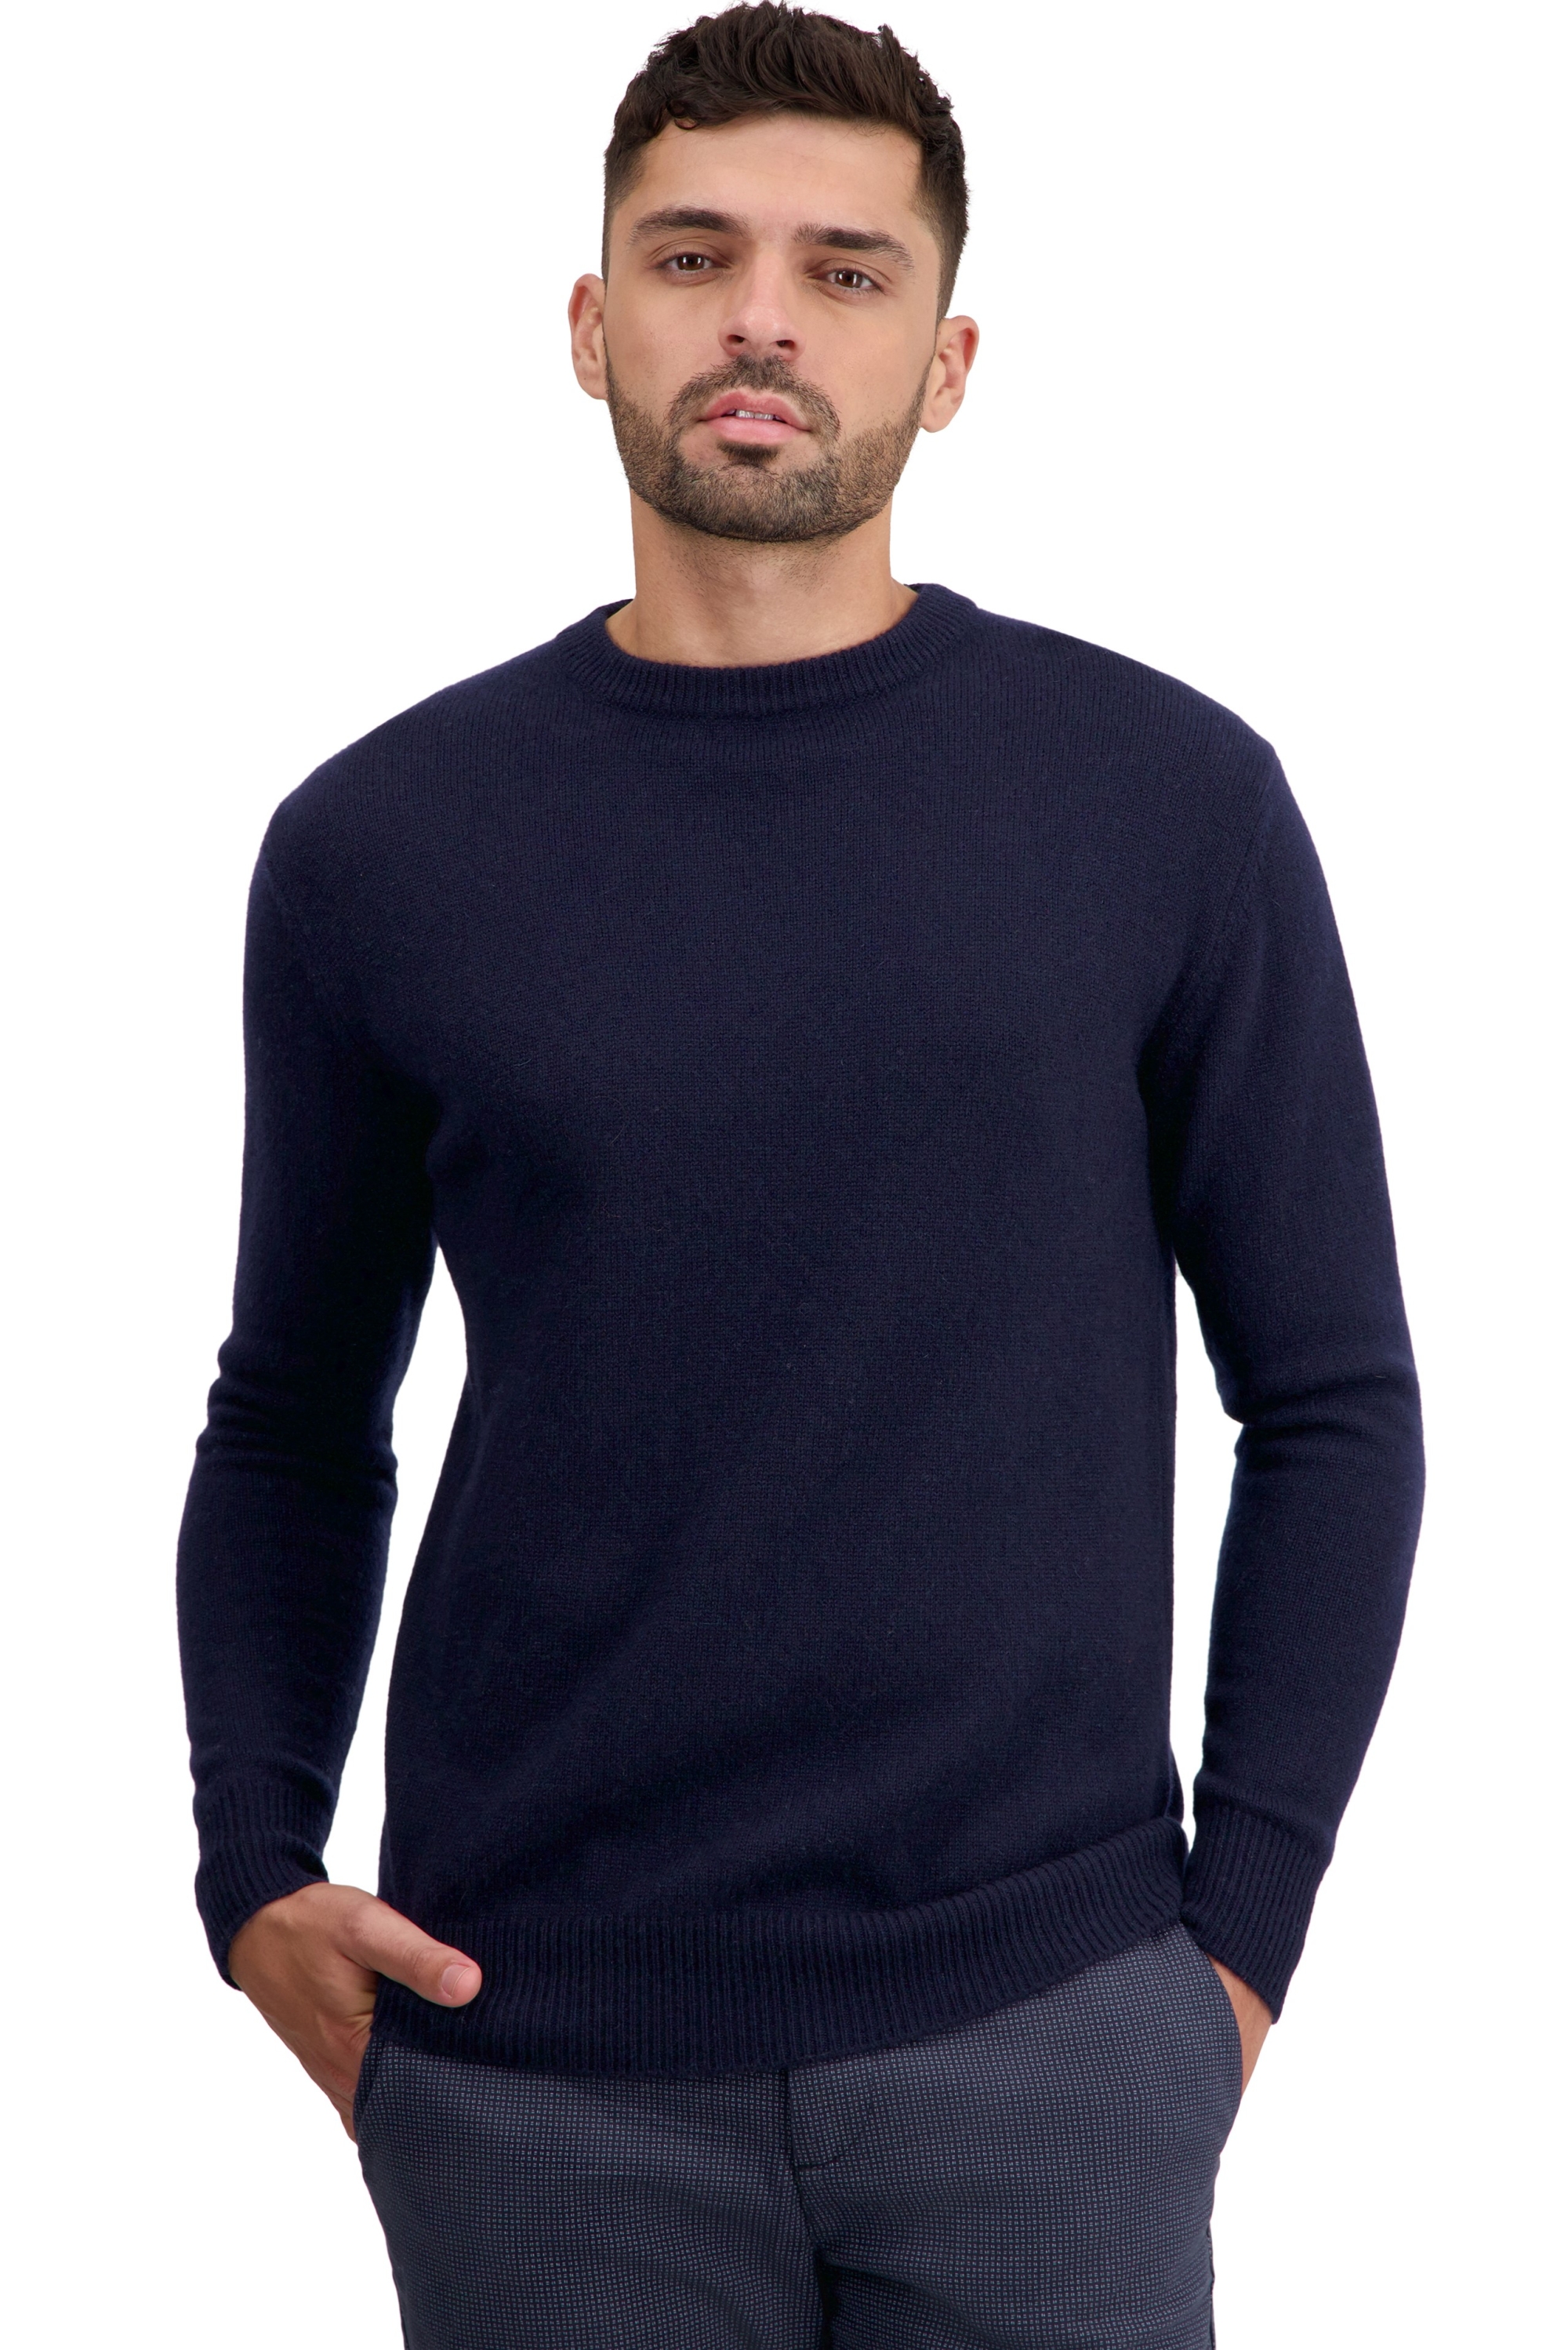 Cashmere men basic sweaters at low prices touraine first dress blue s